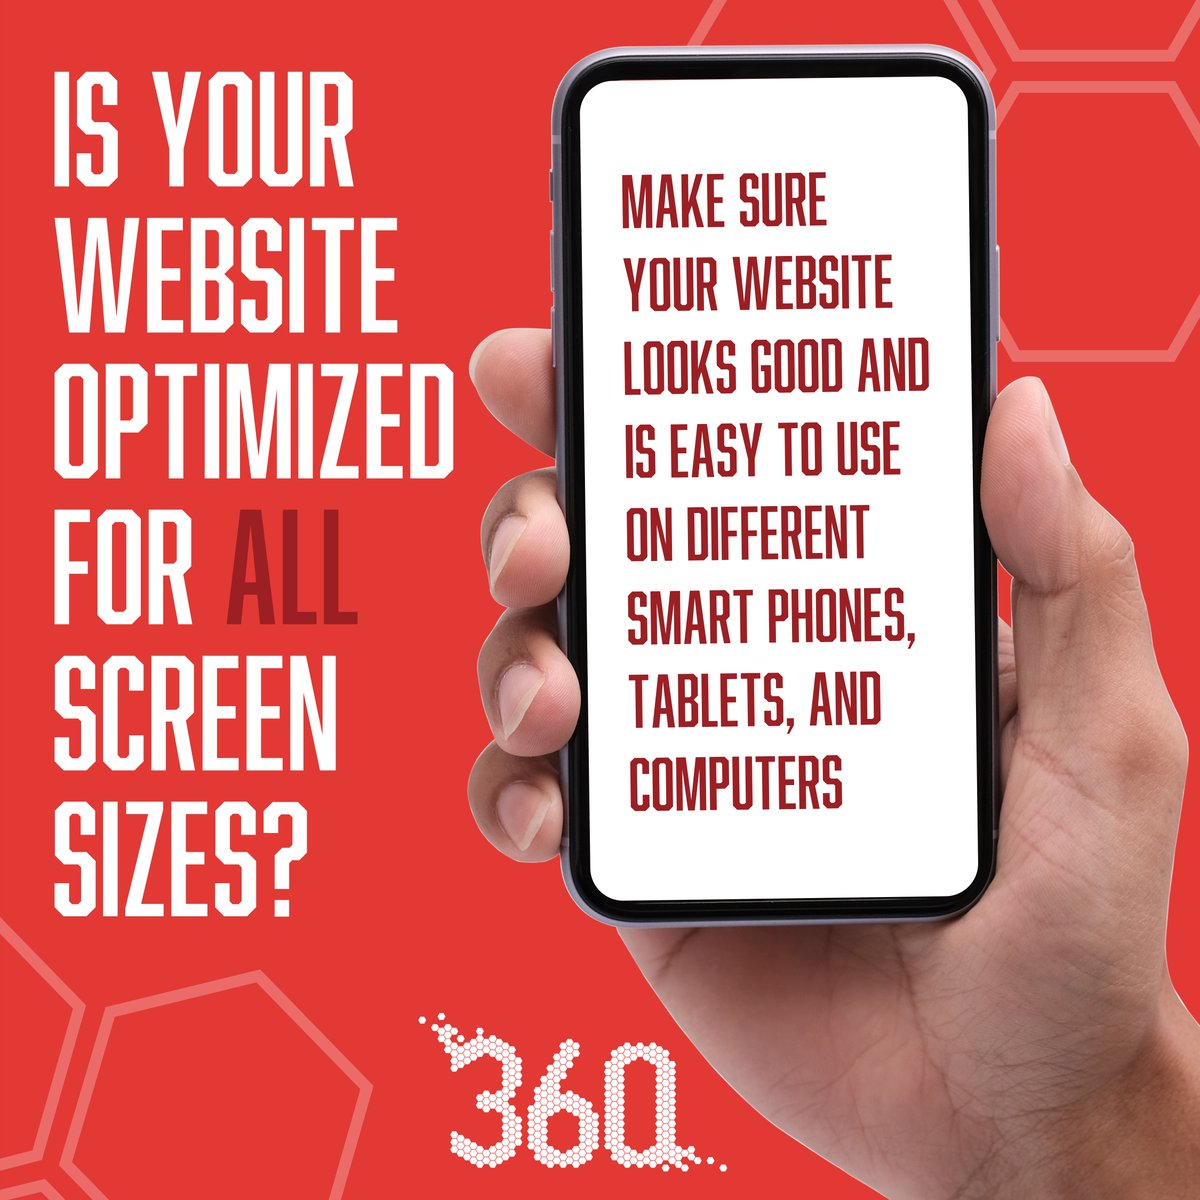 Website optimization is crucial when developing websites today. Over 92% of people use their mobile devices as a primary search tool. Is your website optimized for a user-friendly experience?

#360Elevated #webdesign #weboptimization #digitalmarketing

360elevated.com ...